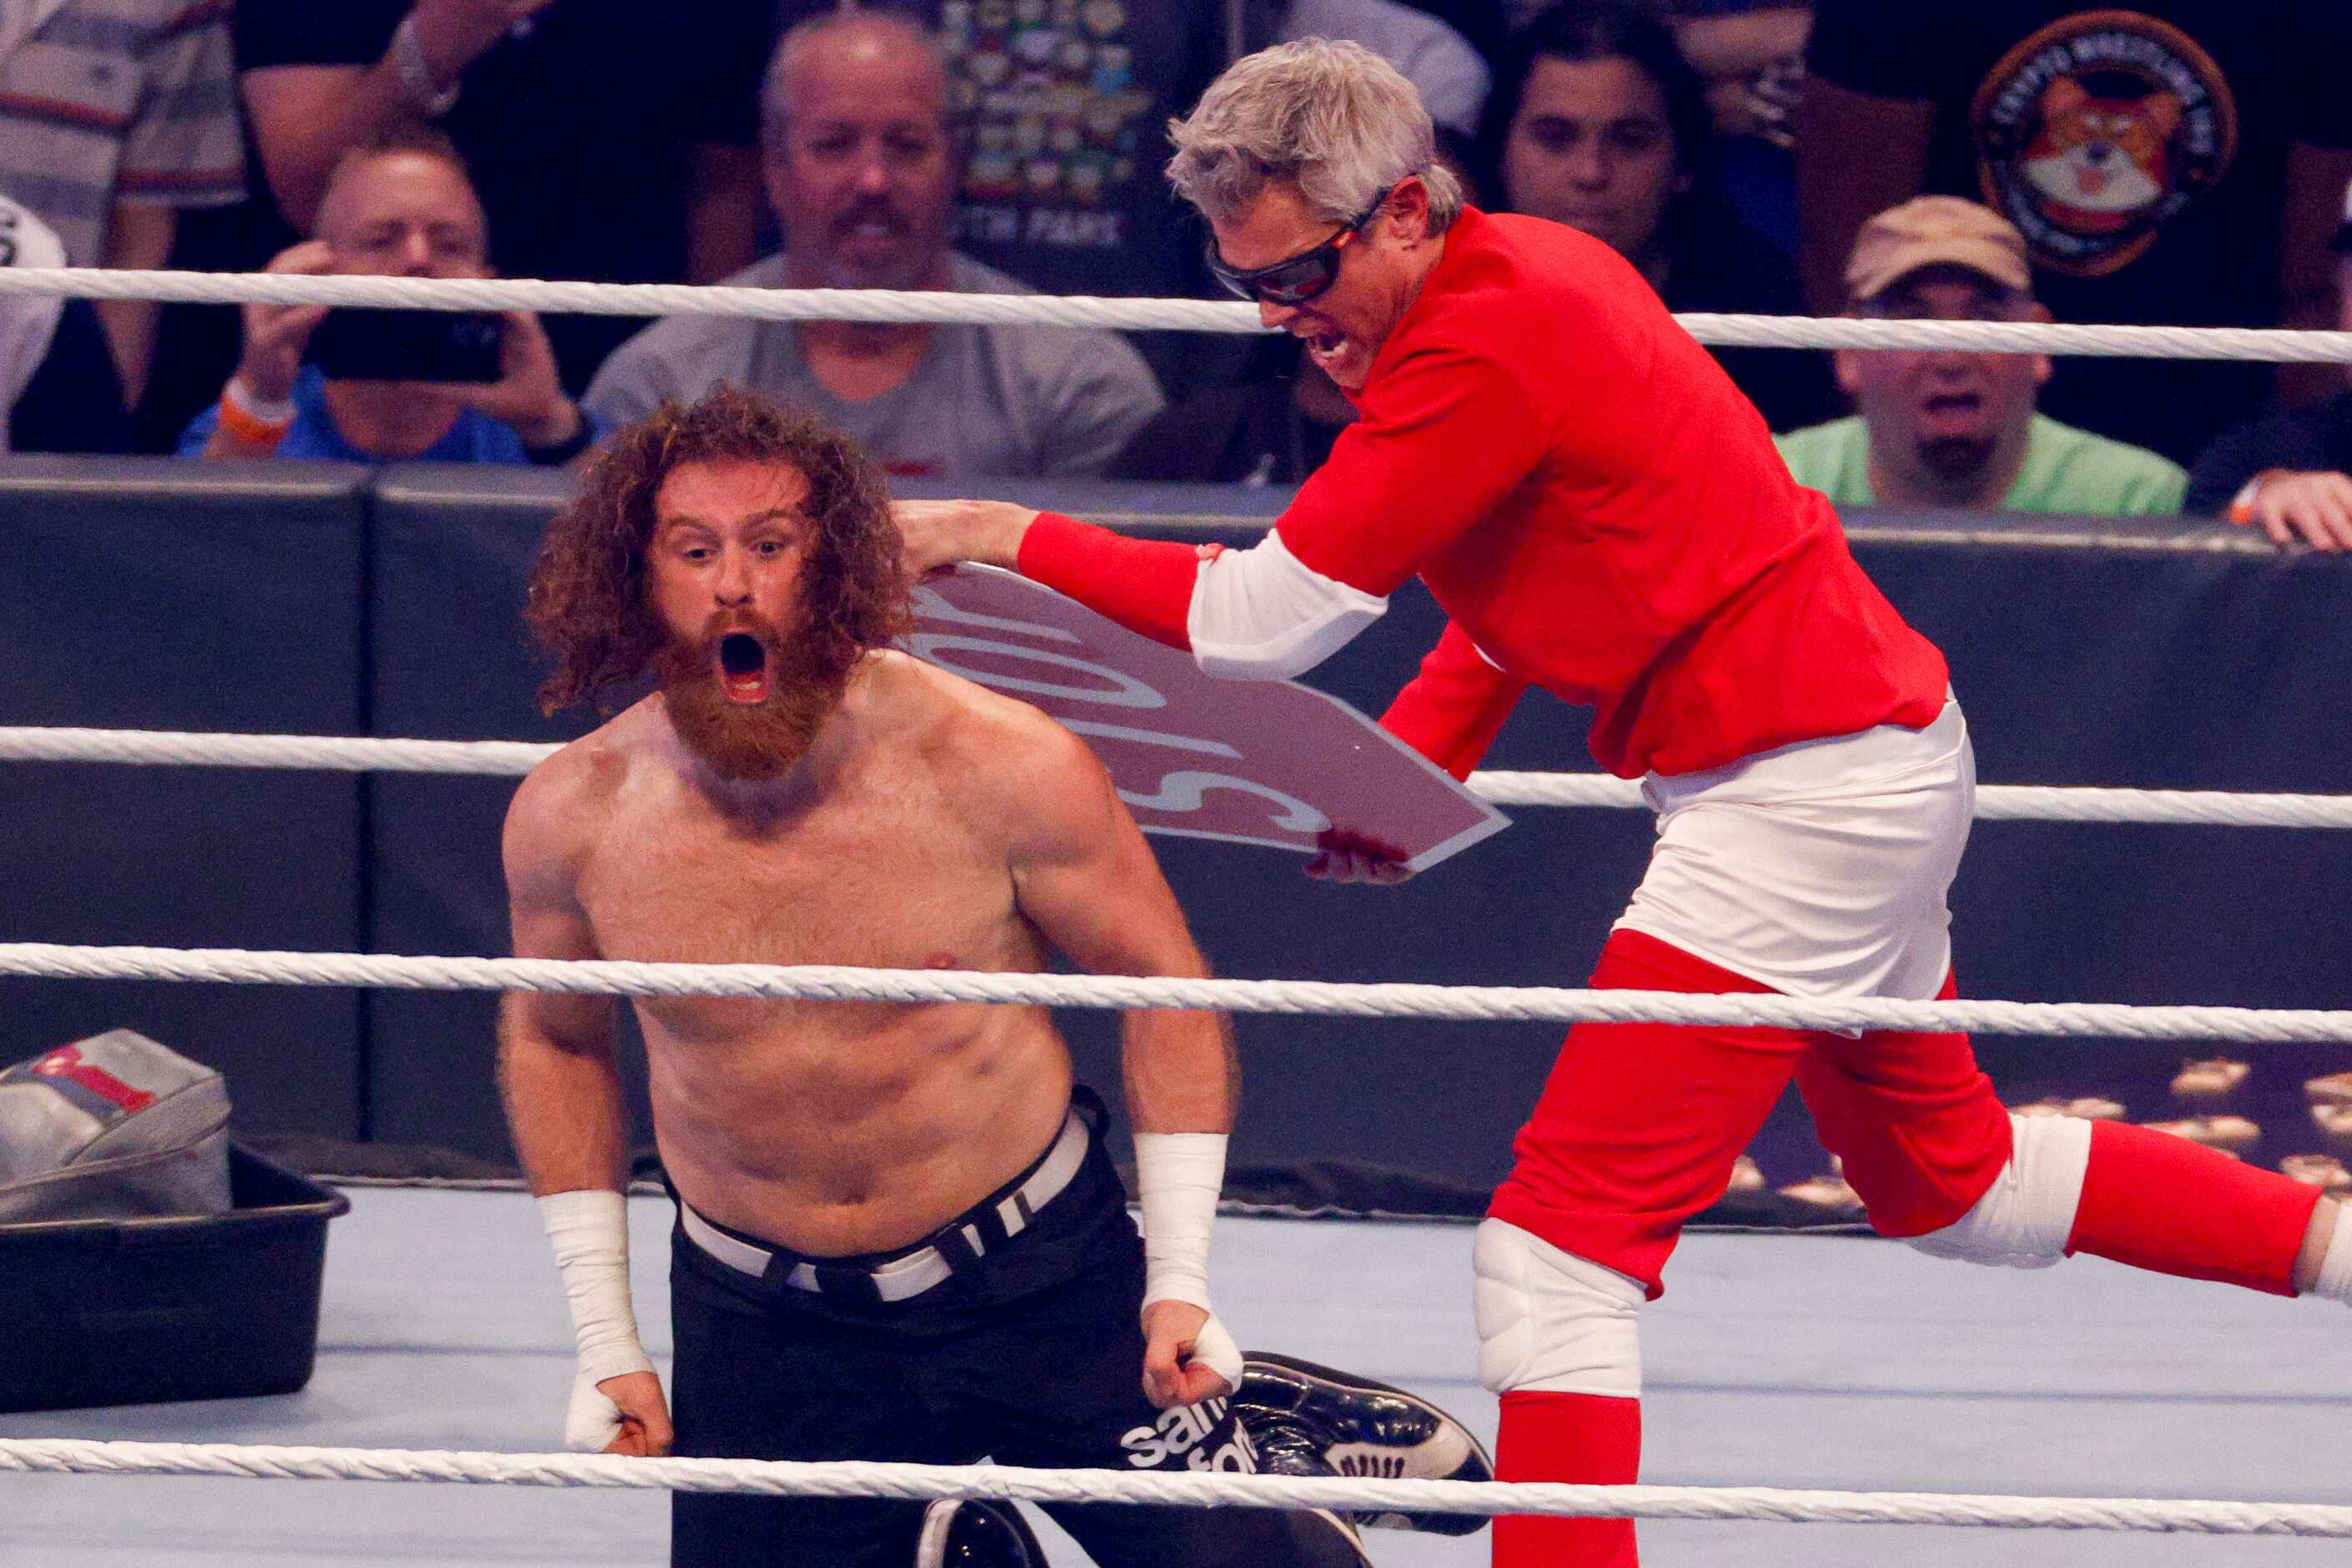 Johnny Knoxville (right) hits Sami Zayn with a stop sign during a match at WrestleMania...